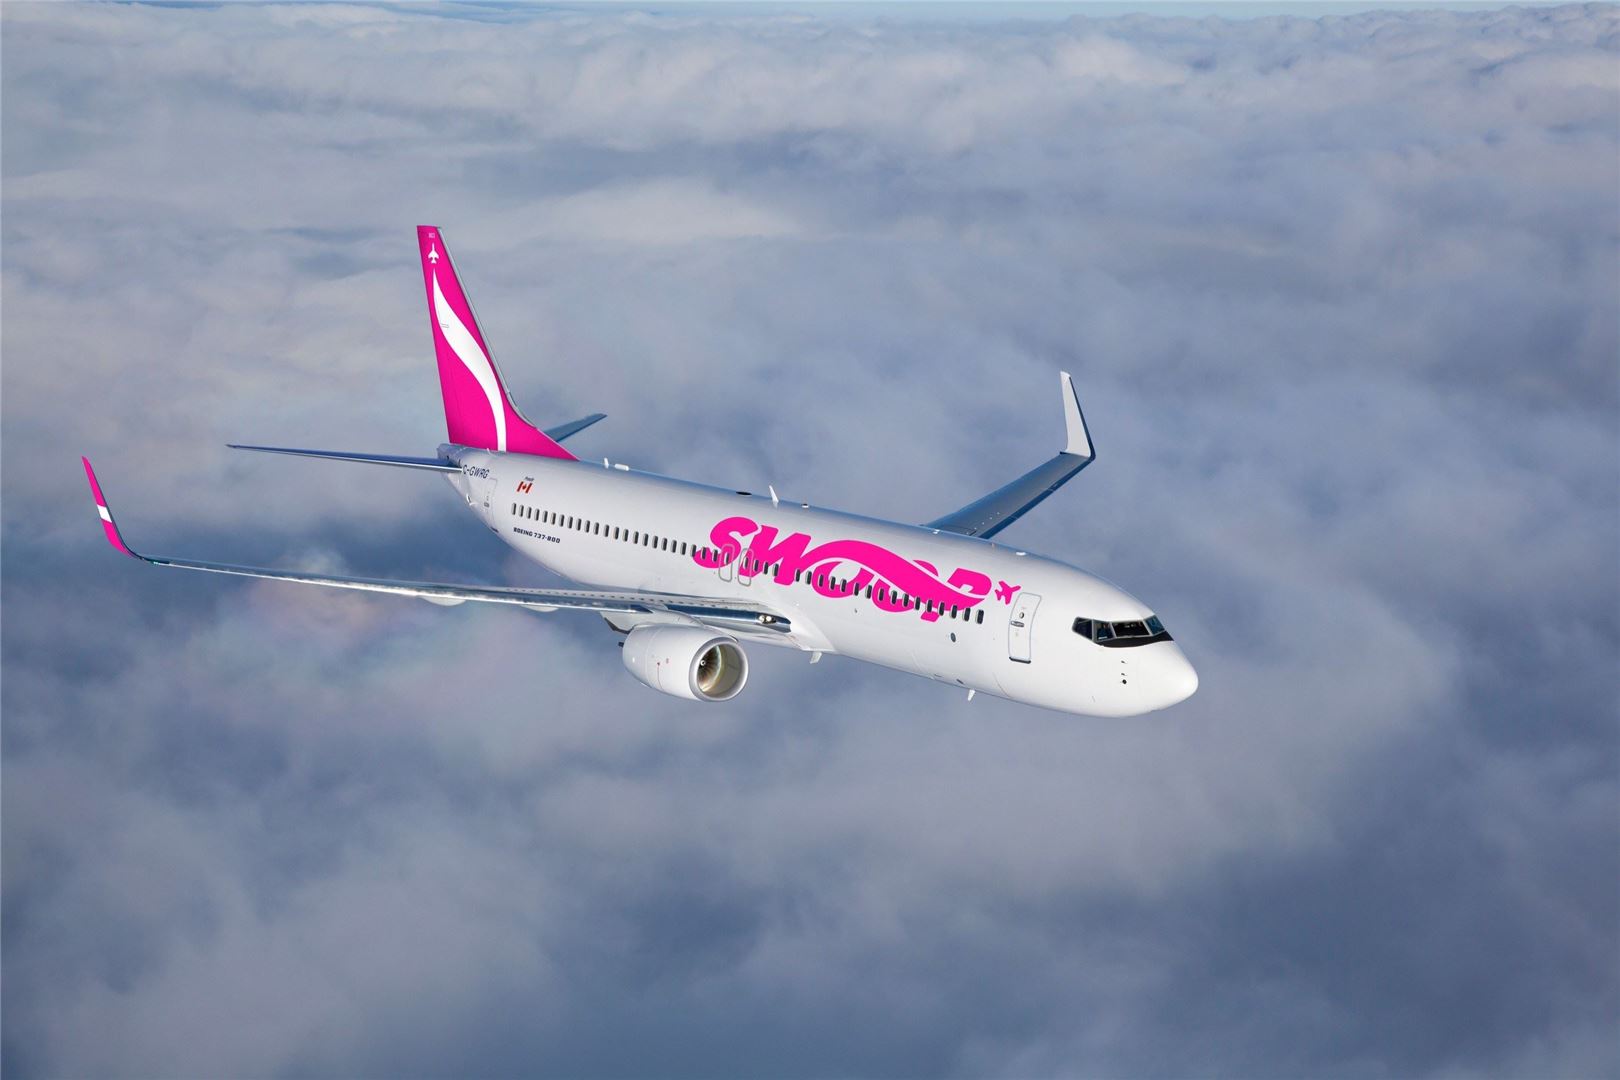 Will Canada Ever See Ultra-Low-Cost Carriers?